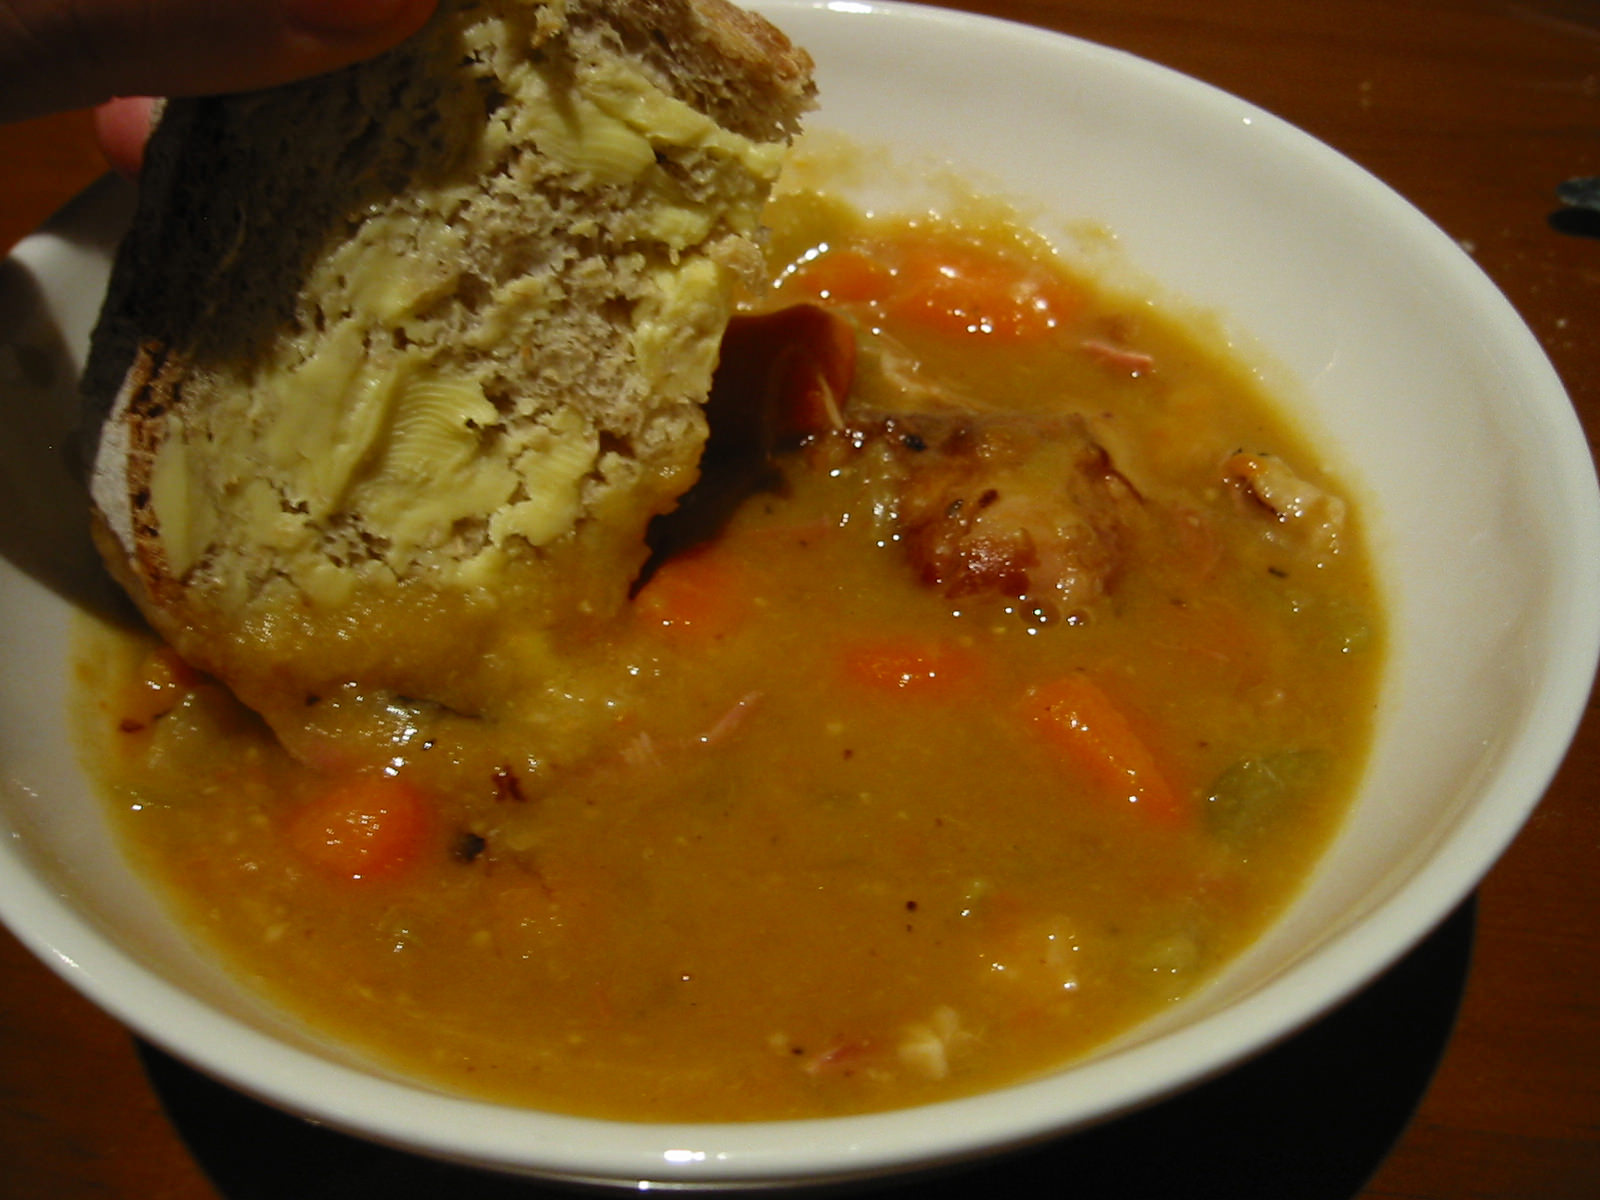 Pea and ham soup, bread dunking